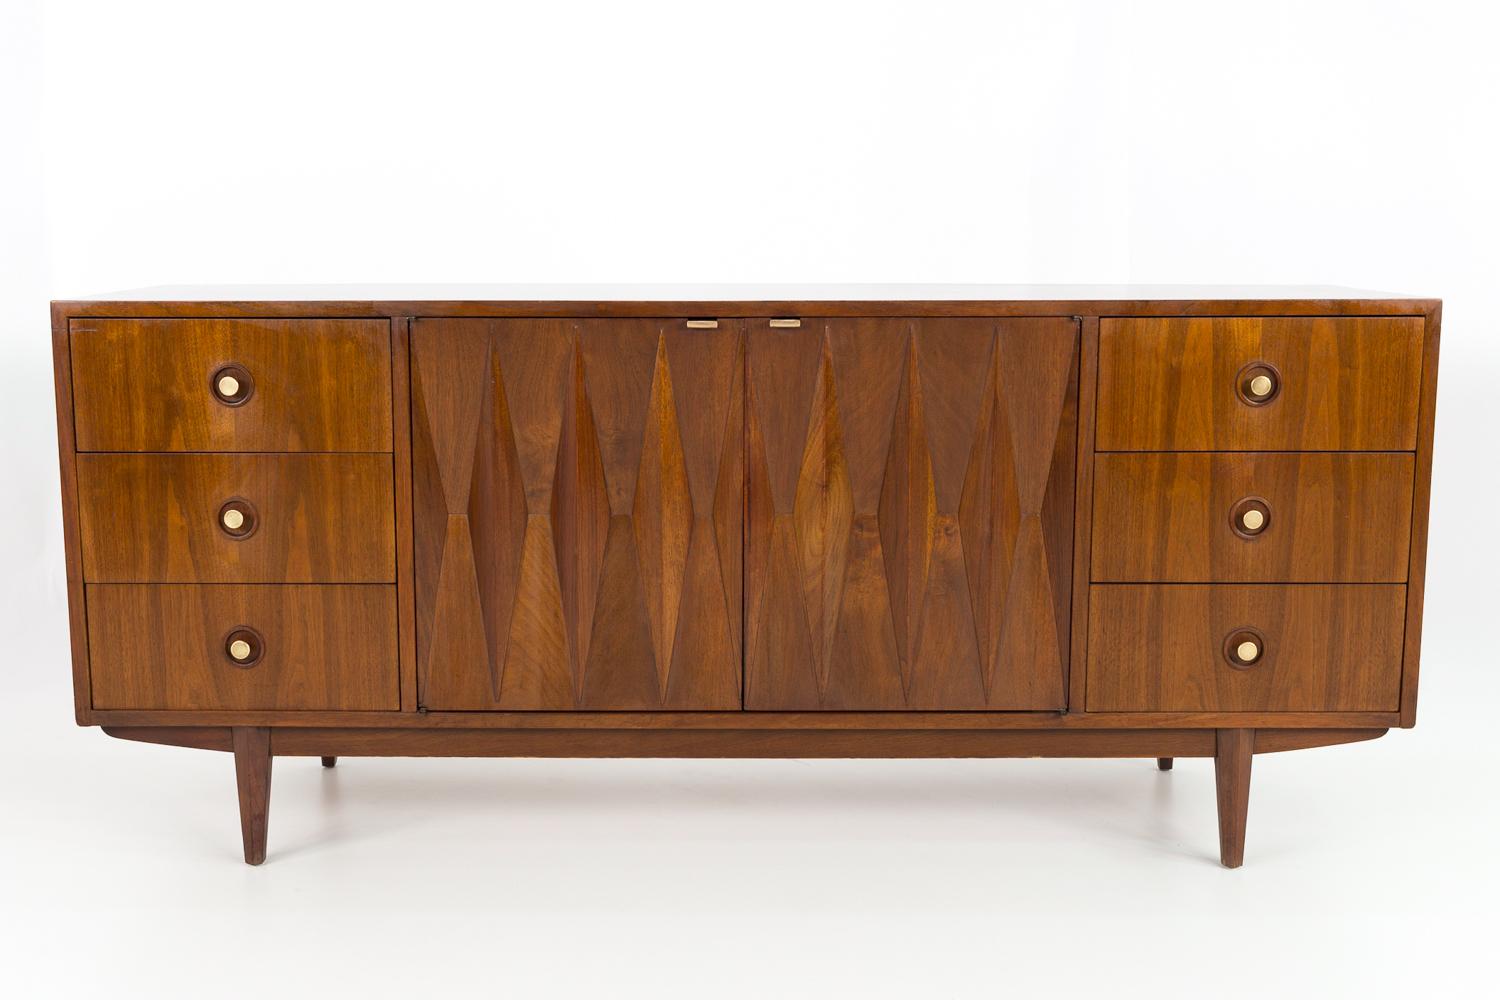 Albert Parvin for American of Martinsville mid century diamond walnut and brass 9 drawer lowboy dresser

This piece measures: 70 wide x 18.5 deep x 30.25 inches high

All pieces of furniture can be had in what we call restored vintage condition.